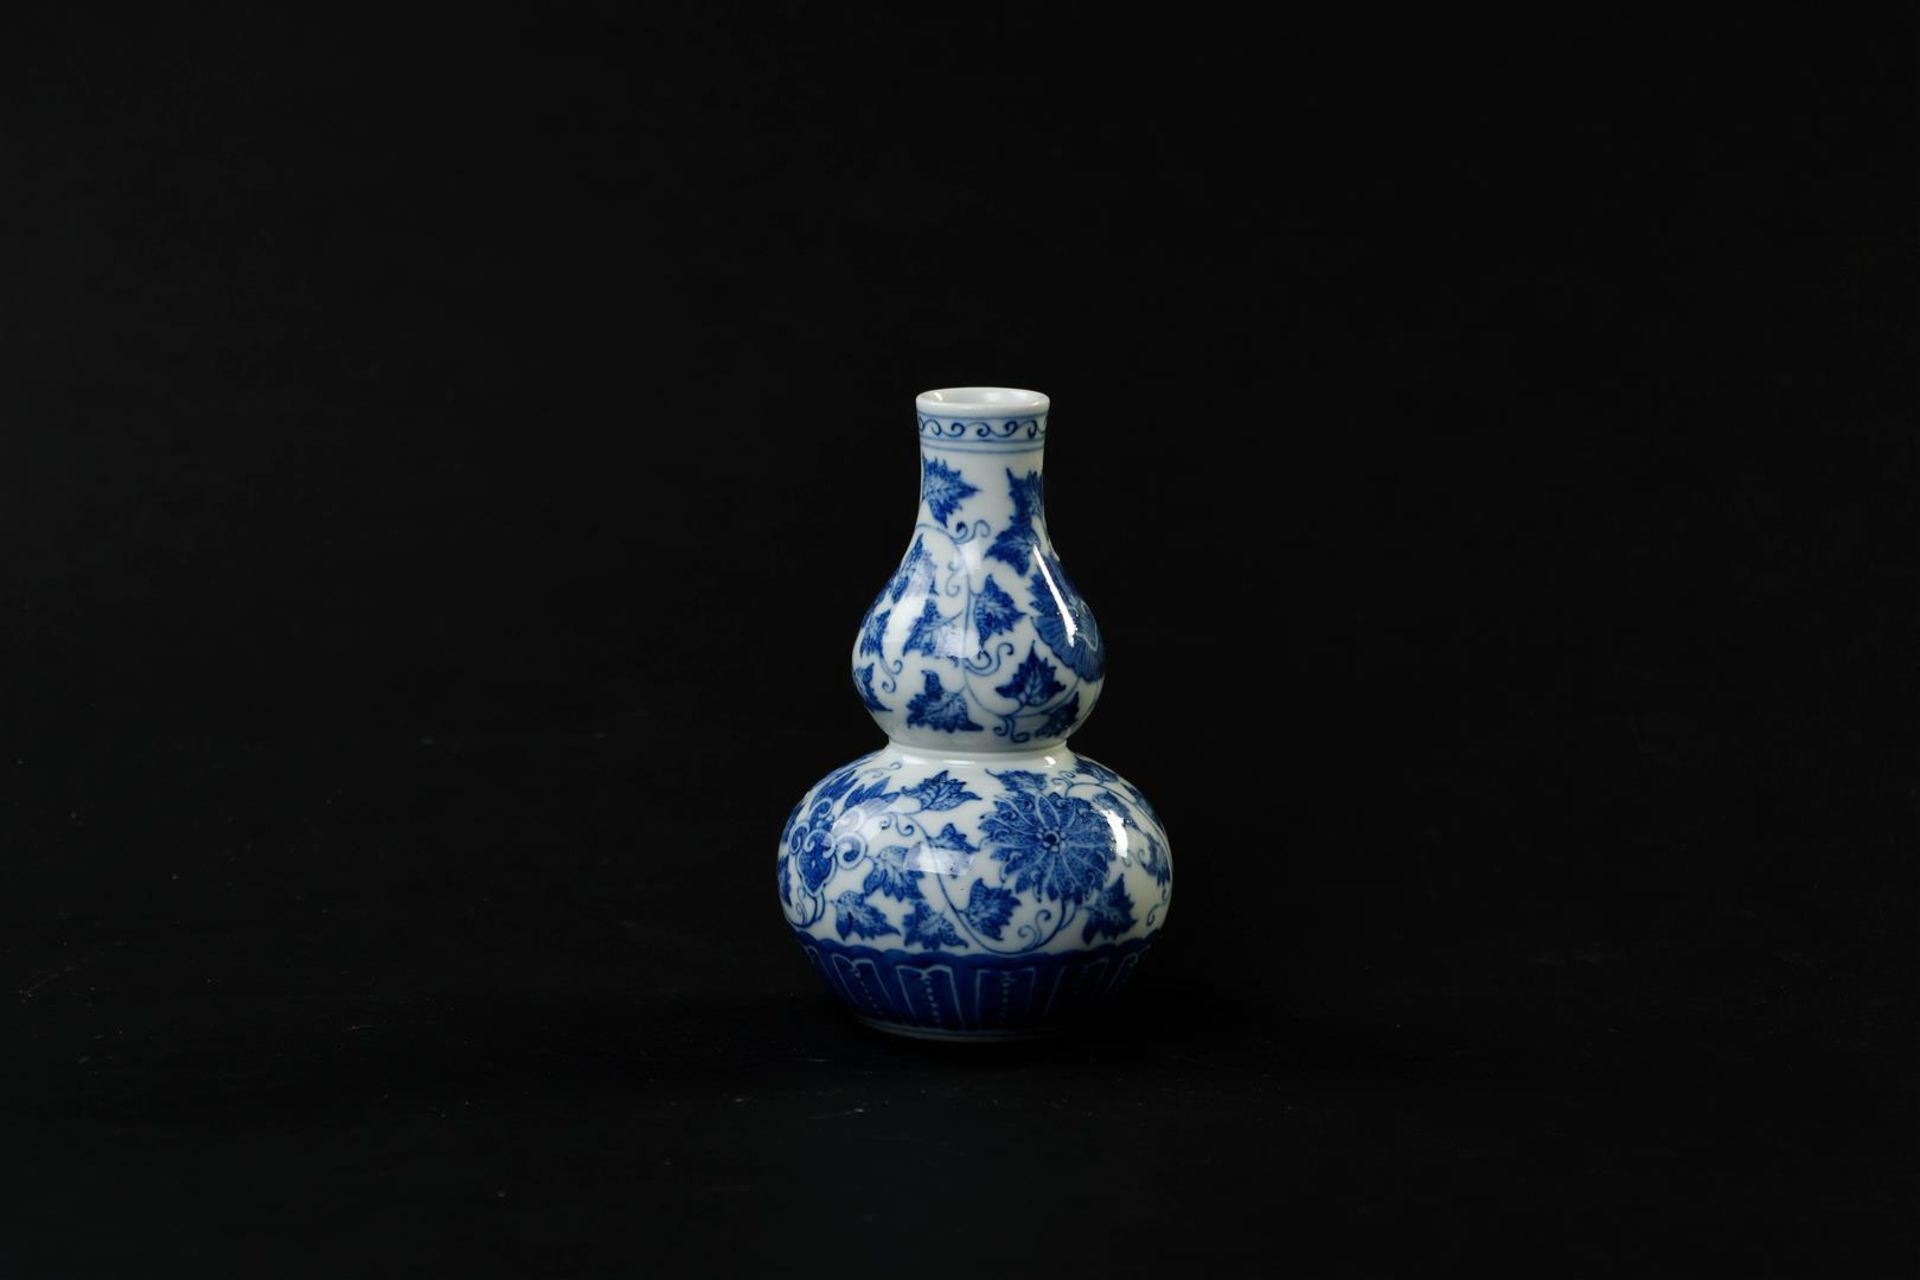 A porcelain gourd vase with a decor of branches and flowers, marked Guanxu. China, 19th century.
H. 